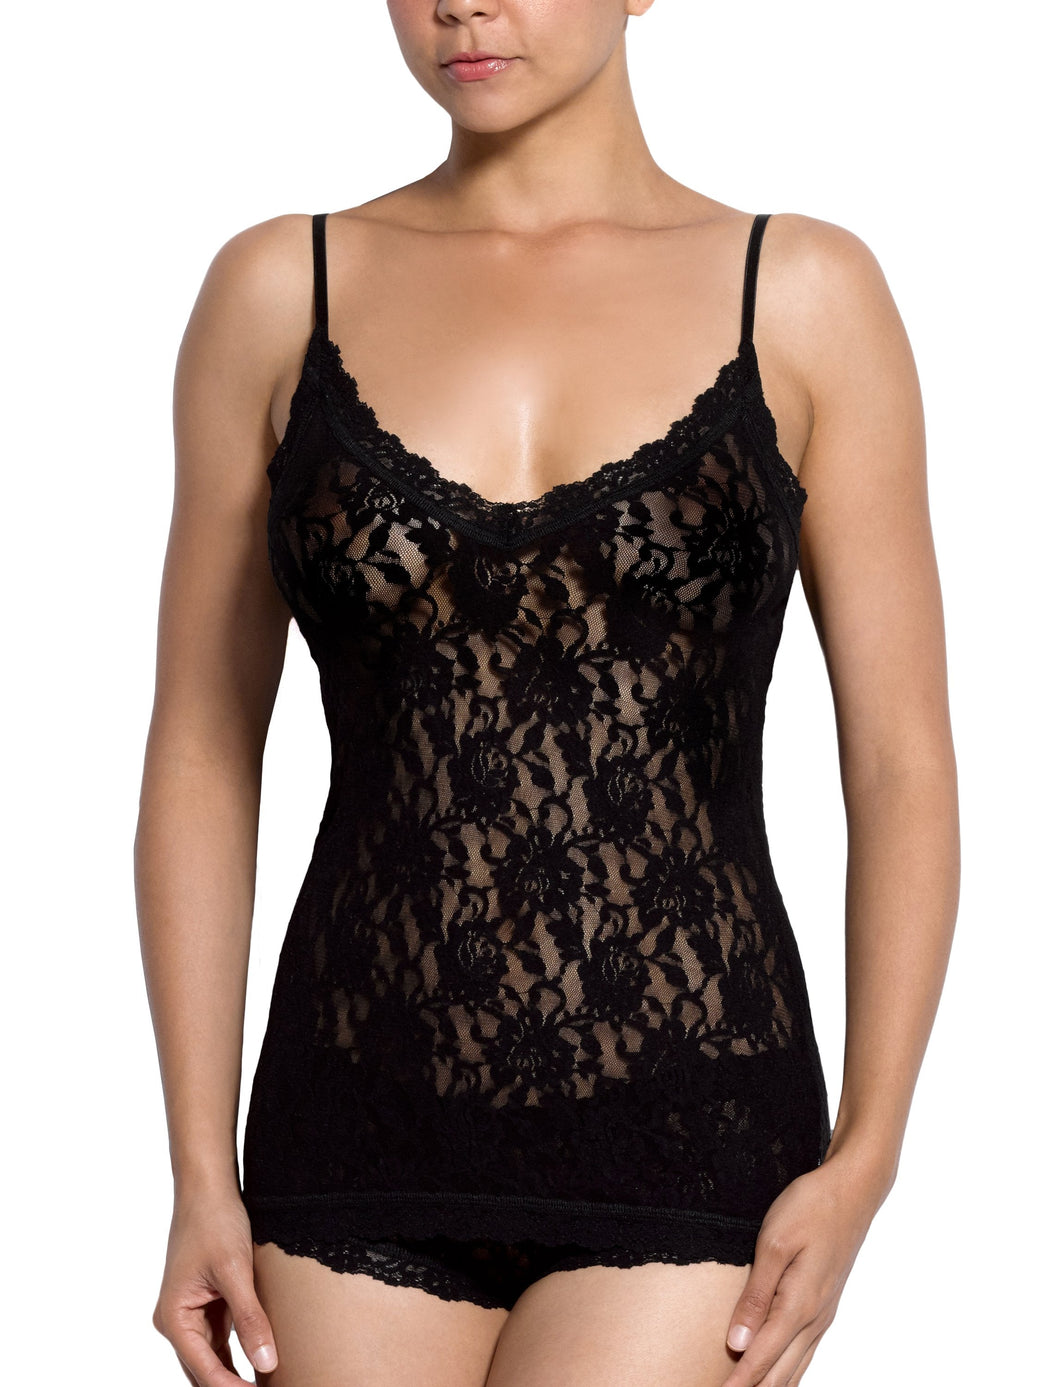 Black Lace Camisole - Bloomingdale's